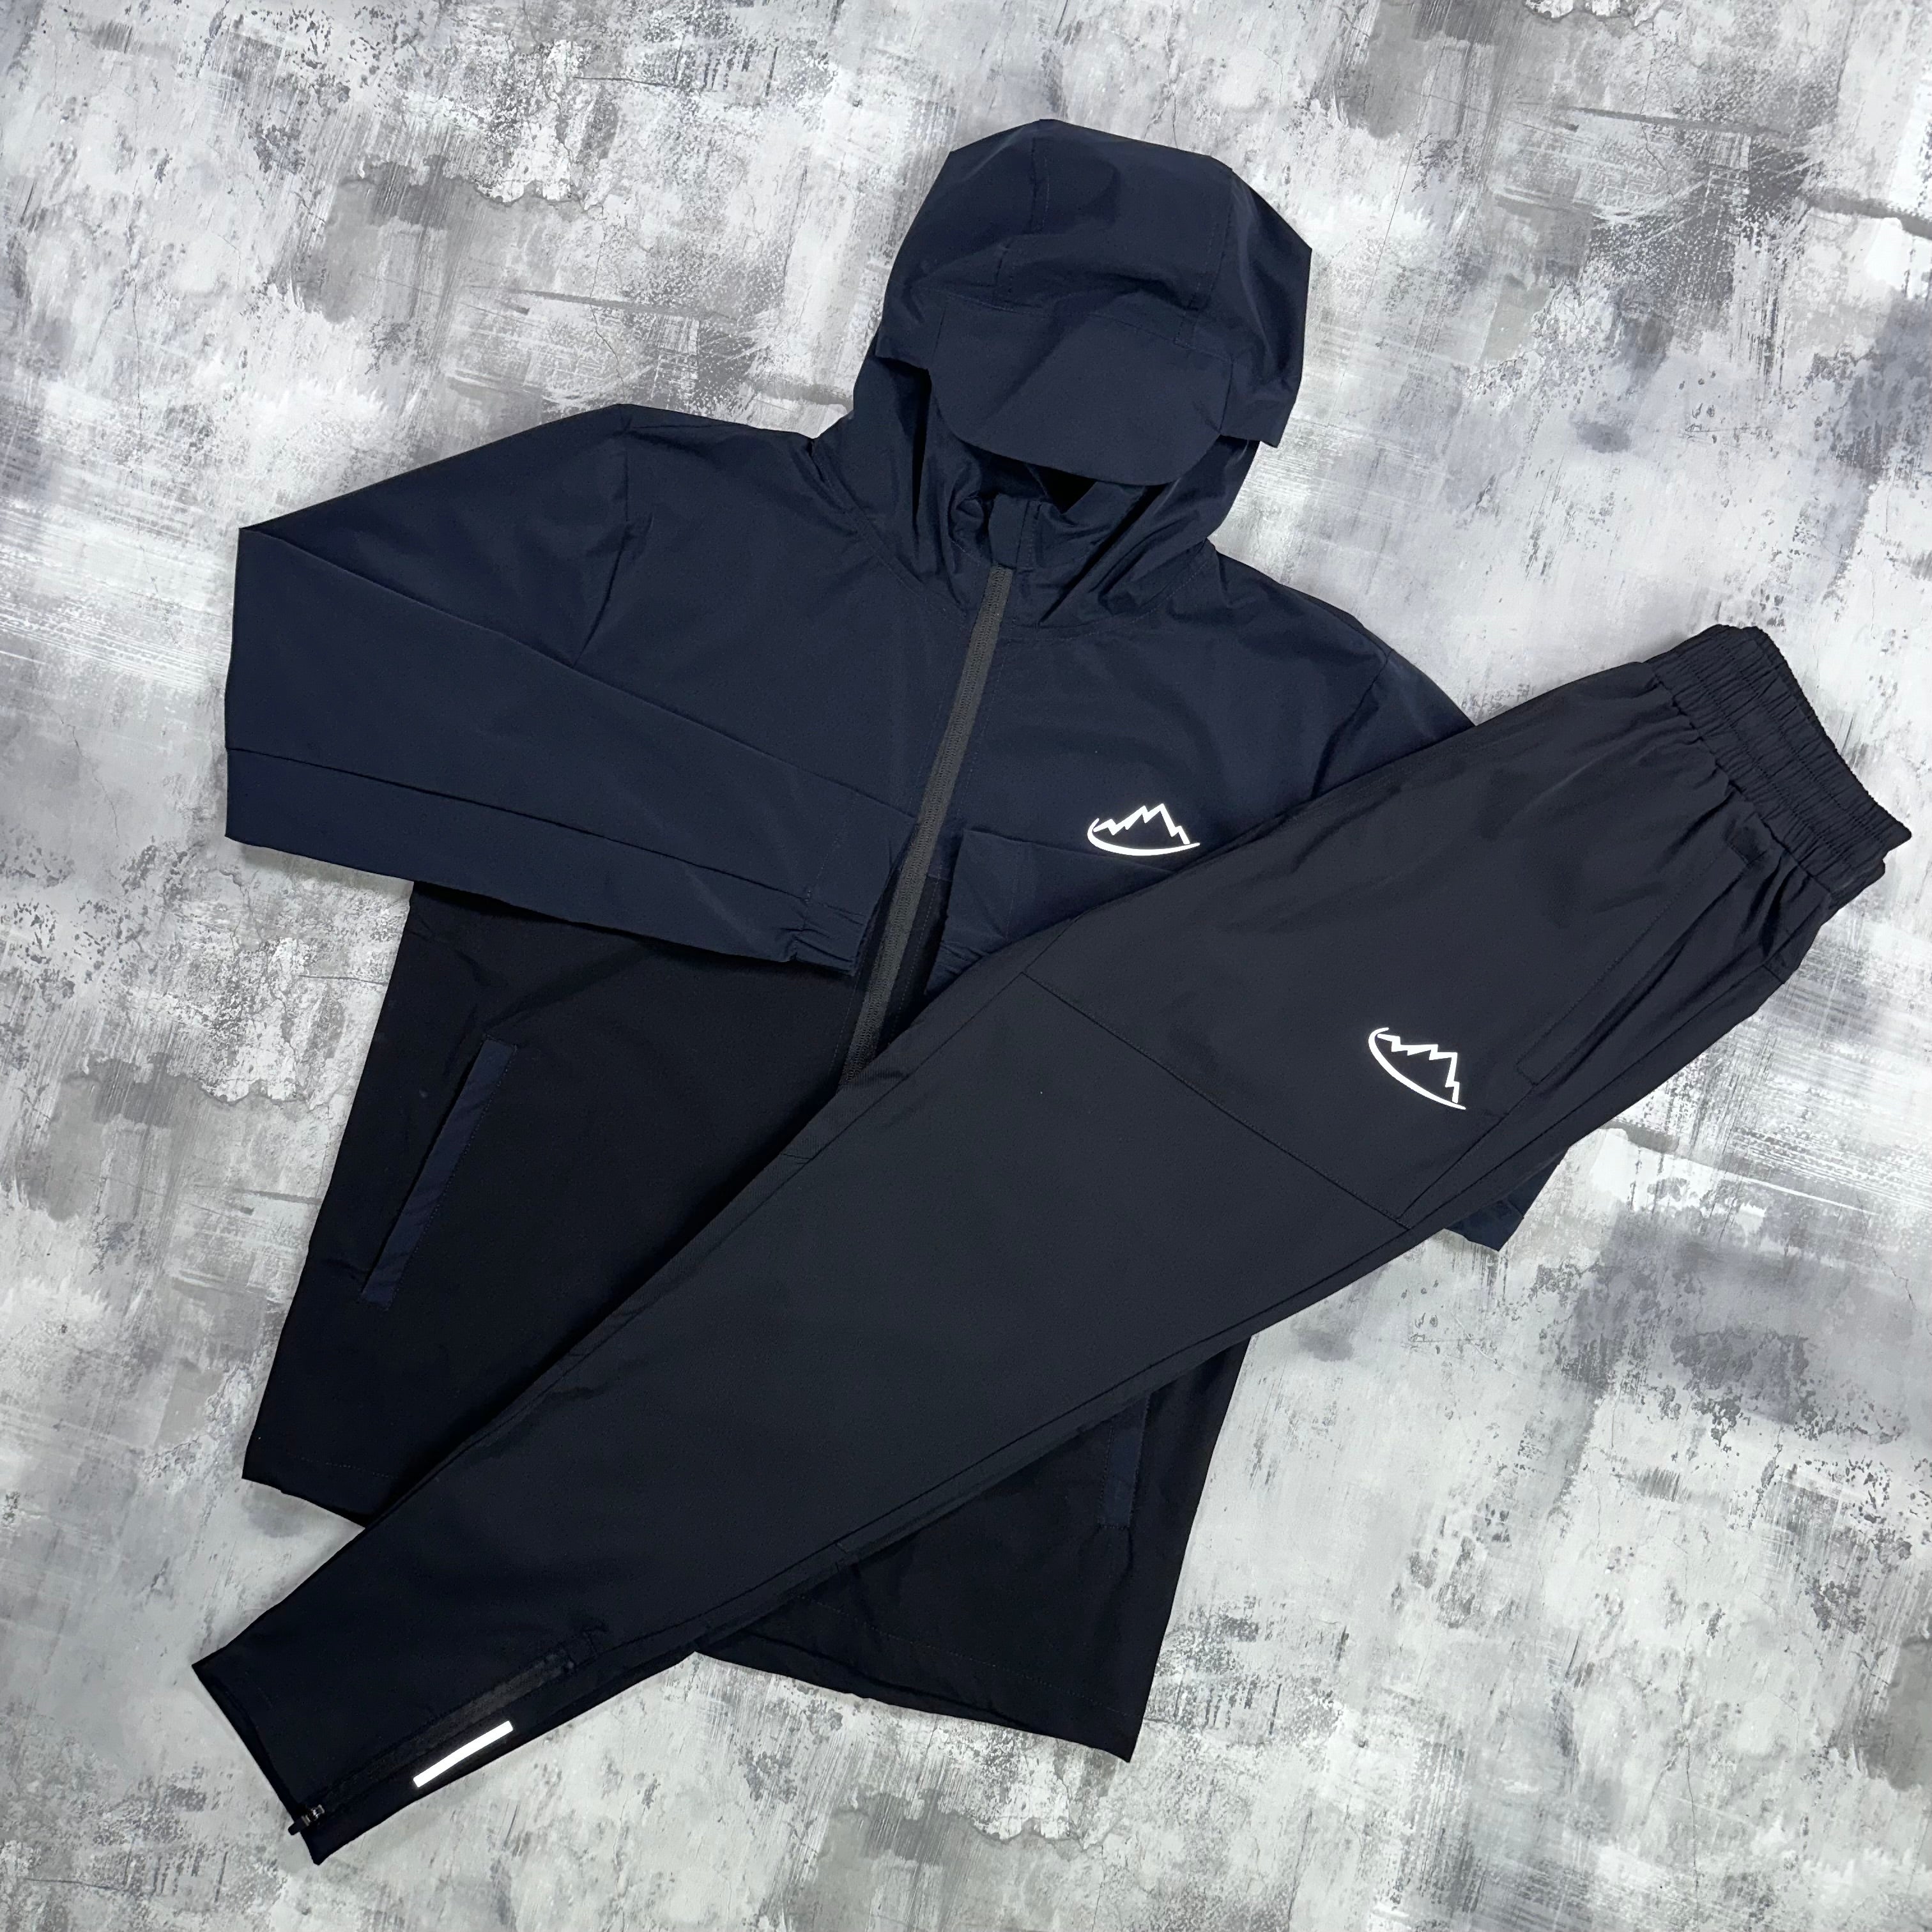 Adapt To Resistance set Navy / Black - Jacket & Trousers